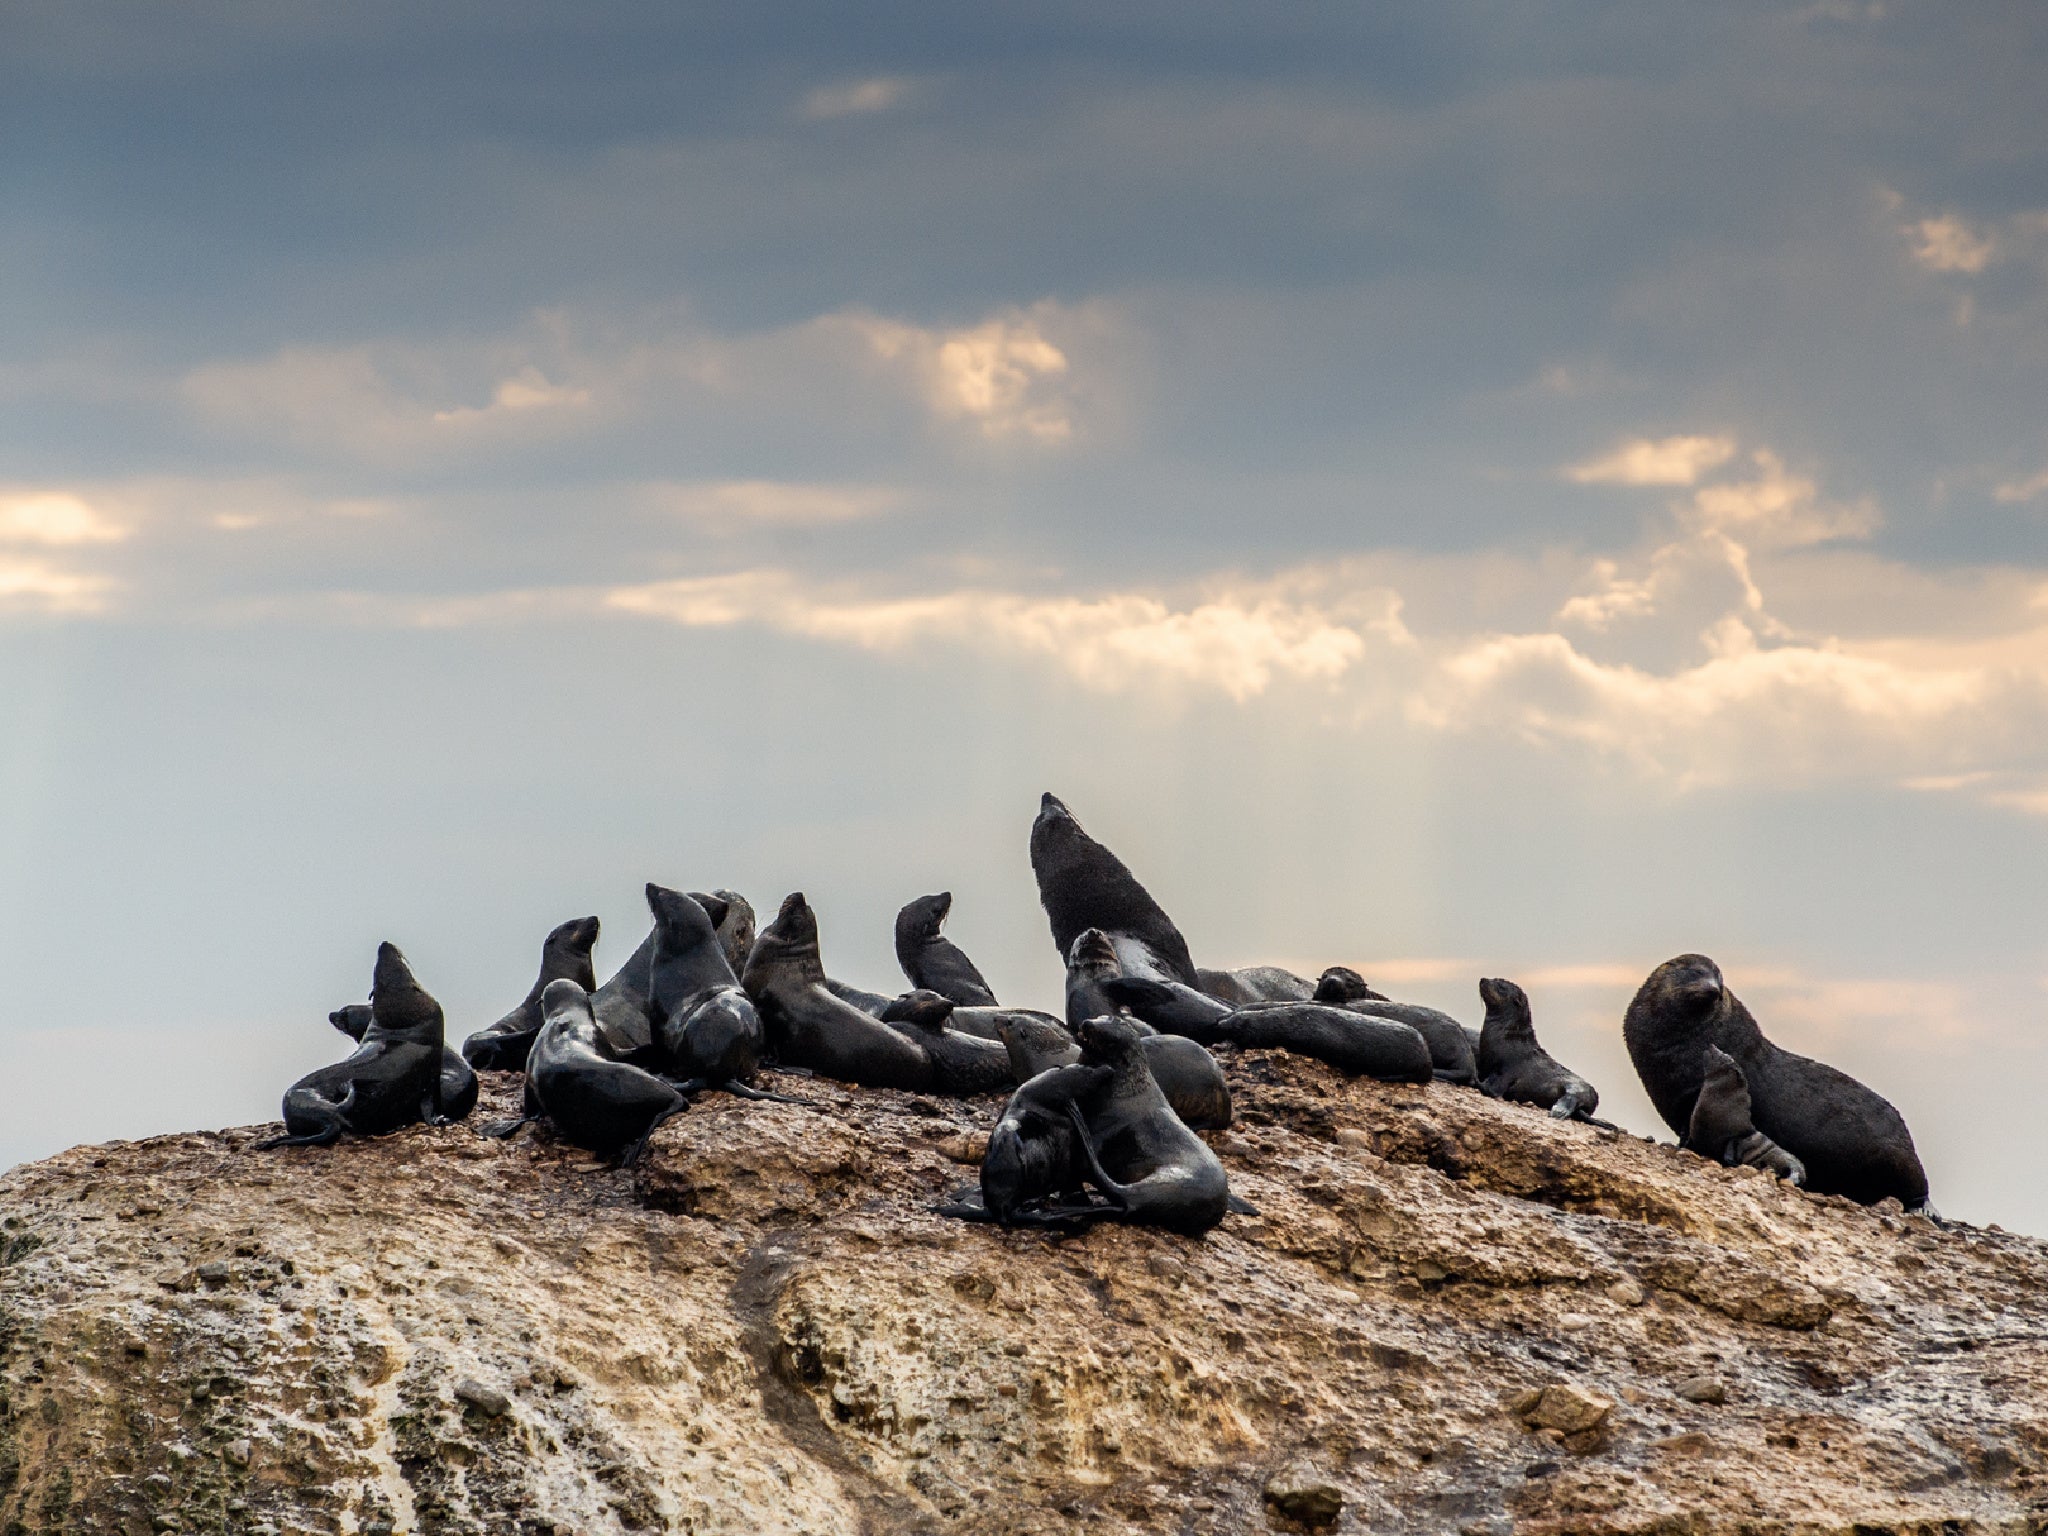 The alert applies to a 400-mile stretch of coastline home to Cape fur seals